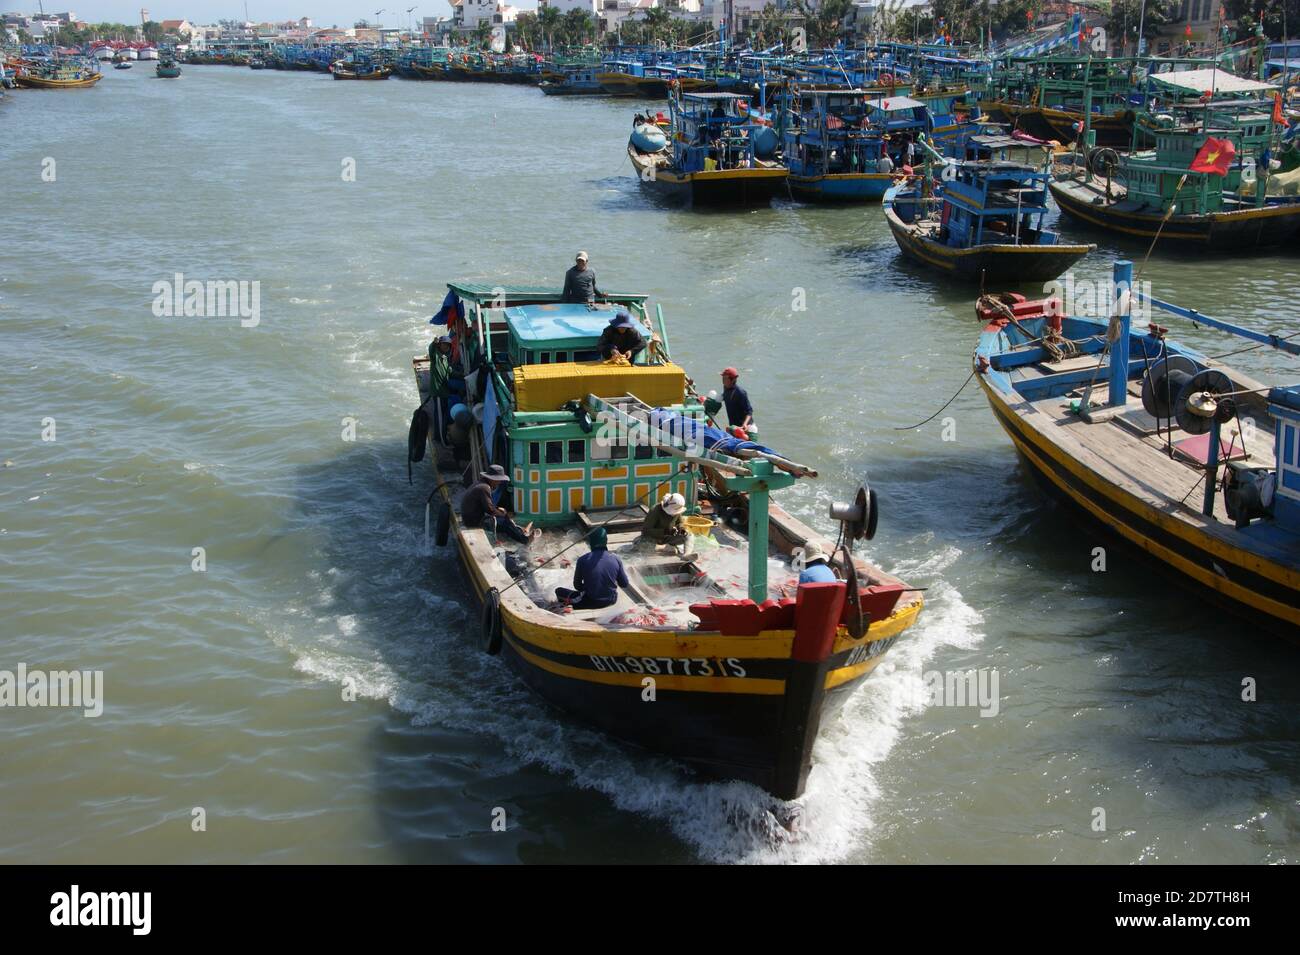 A Fishing family, leaving phan thiet harbour, prepares for a trip on the South China Seas. Stock Photo